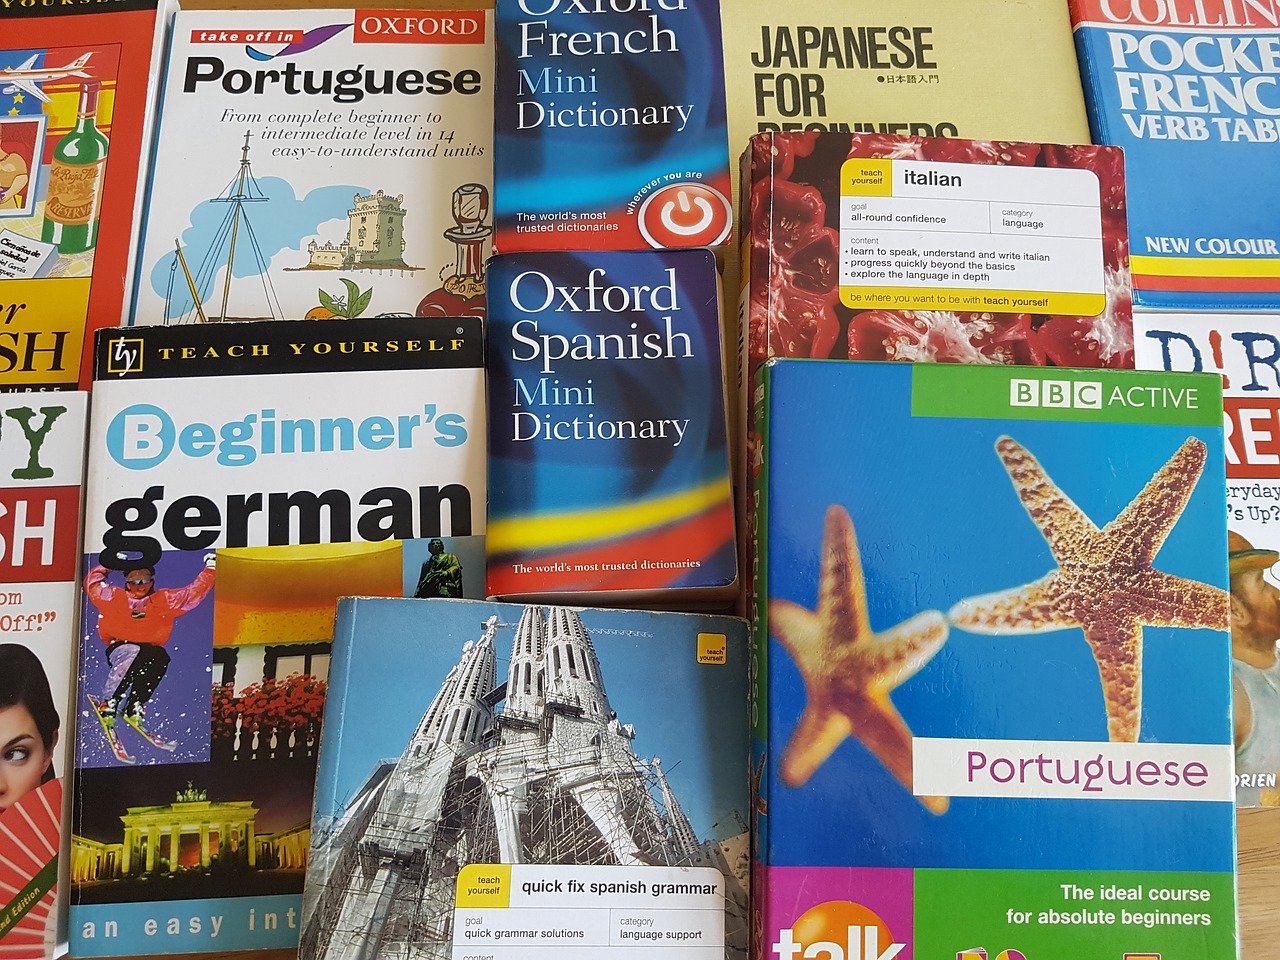 assorted-dictionaries-for-learning-a-foreign-language-at-an-older-age